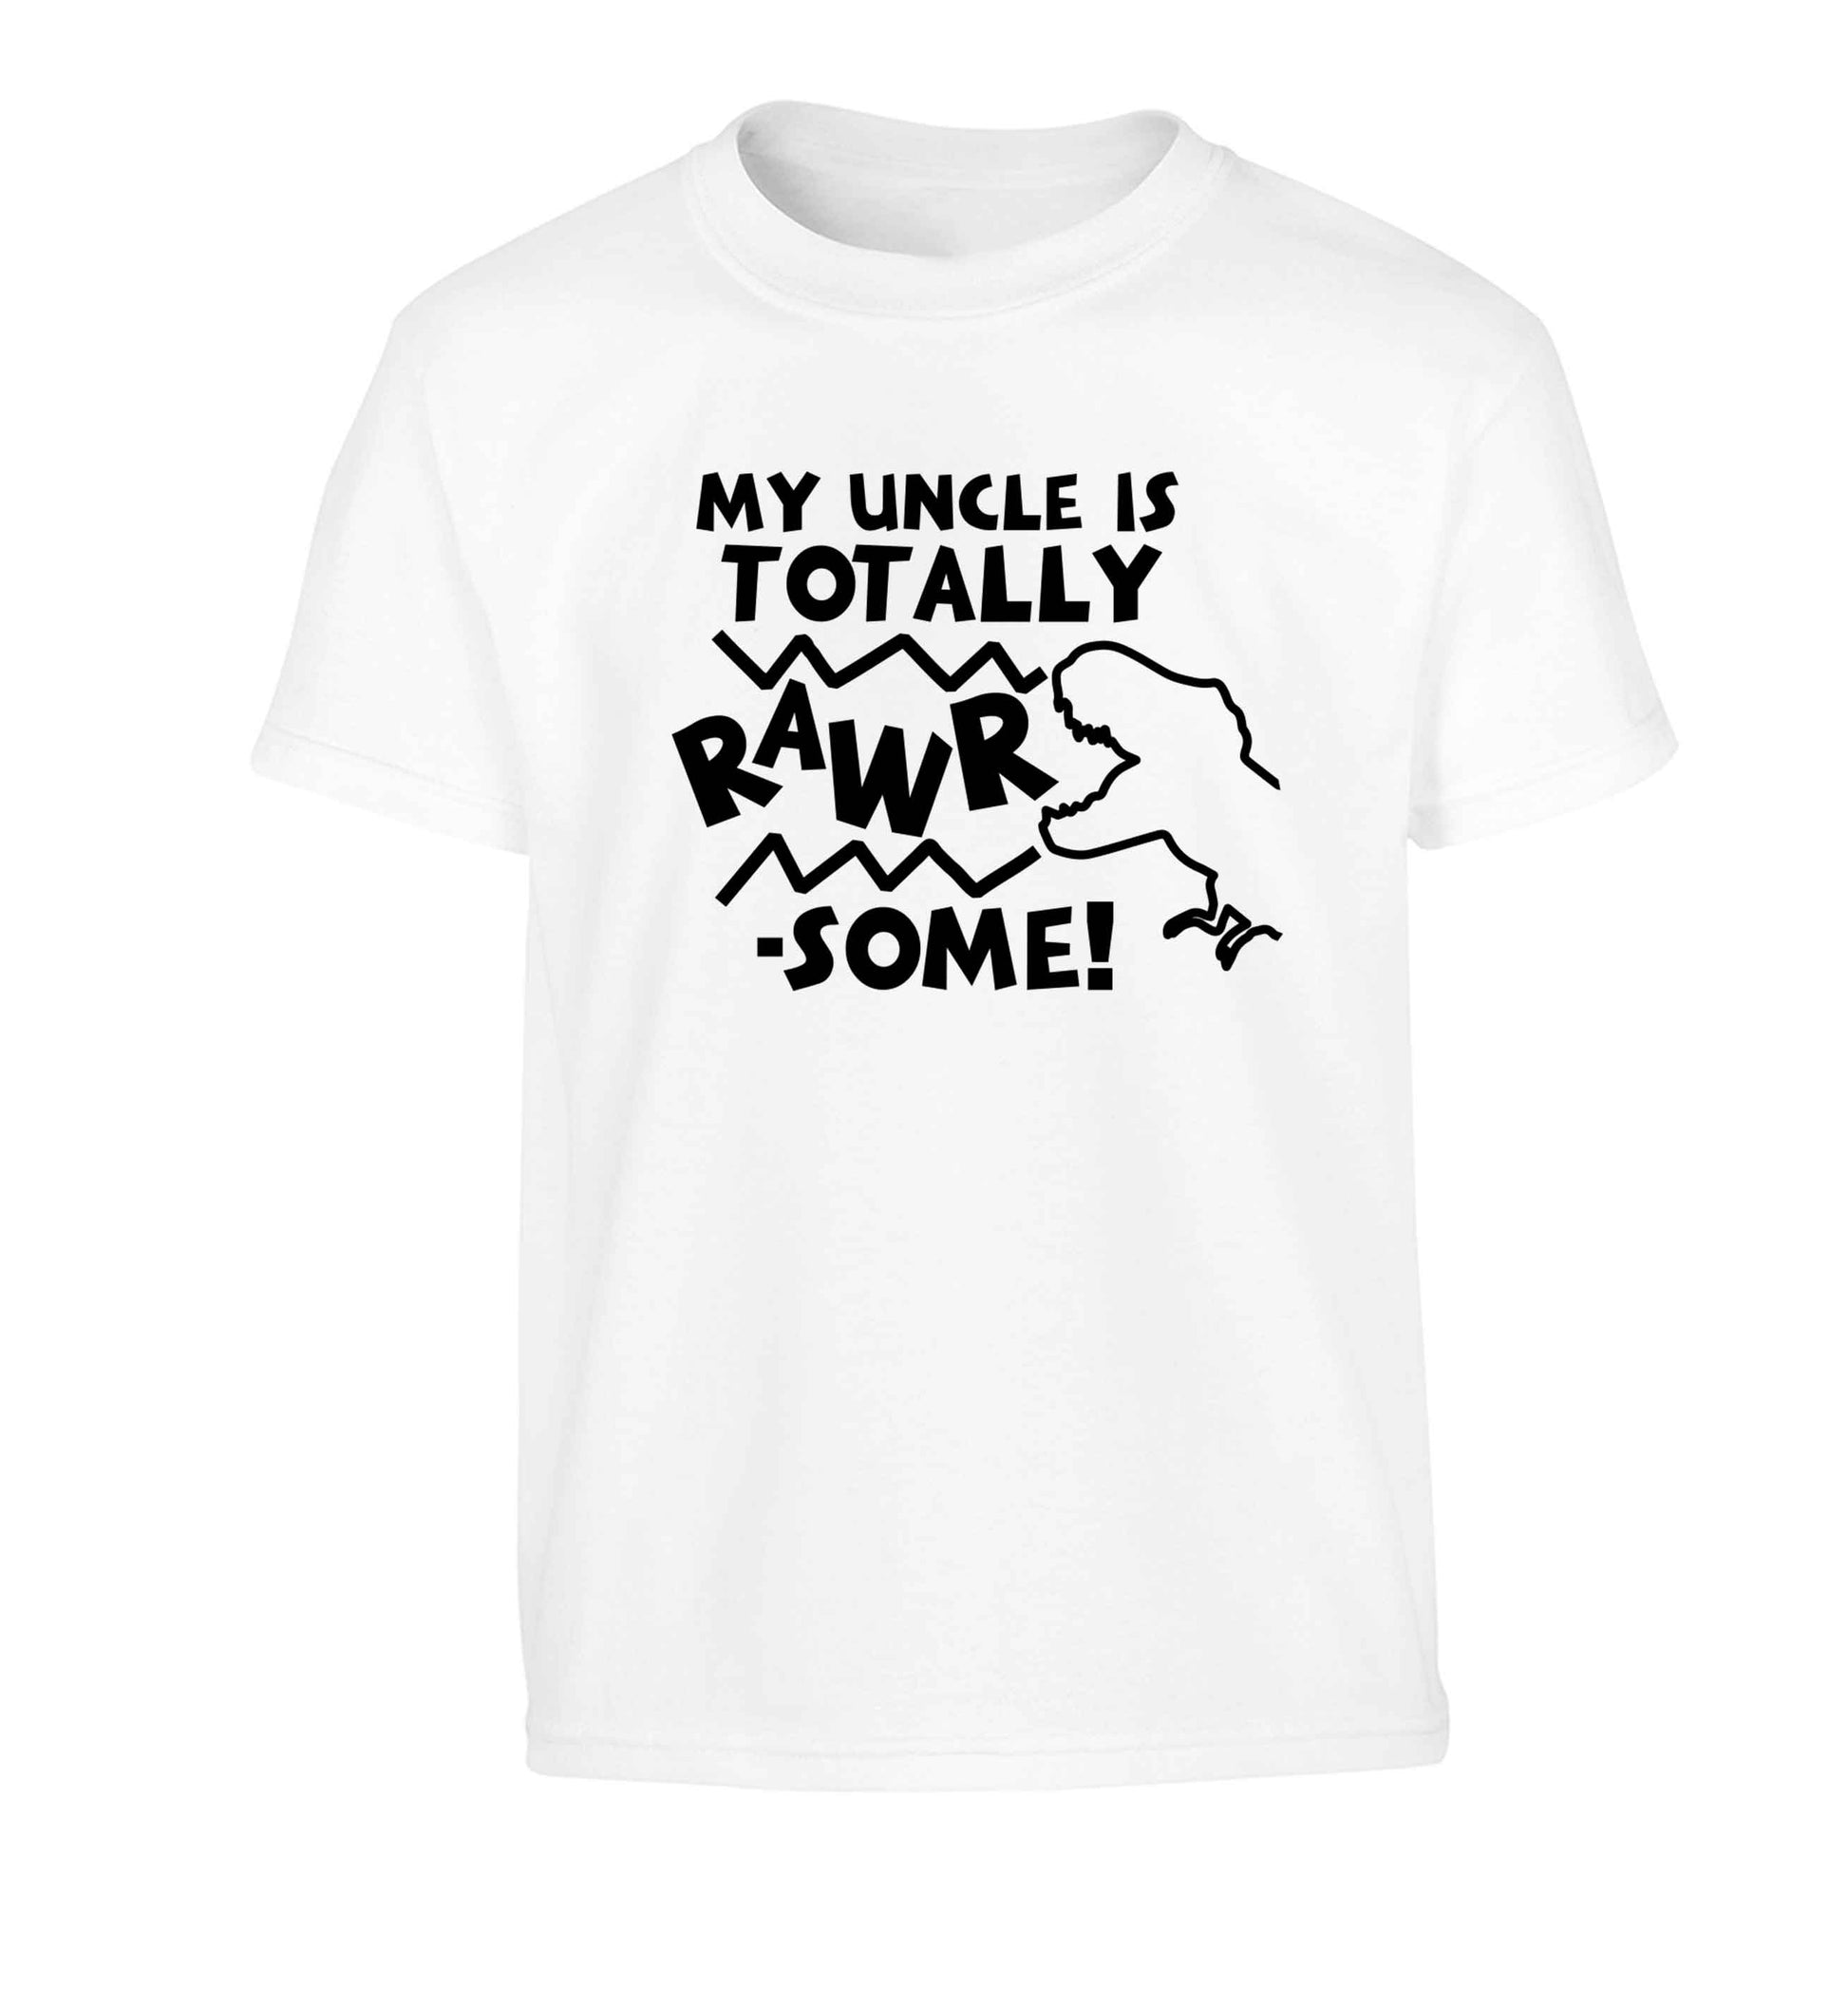 My uncle is totally rawrsome Children's white Tshirt 12-13 Years